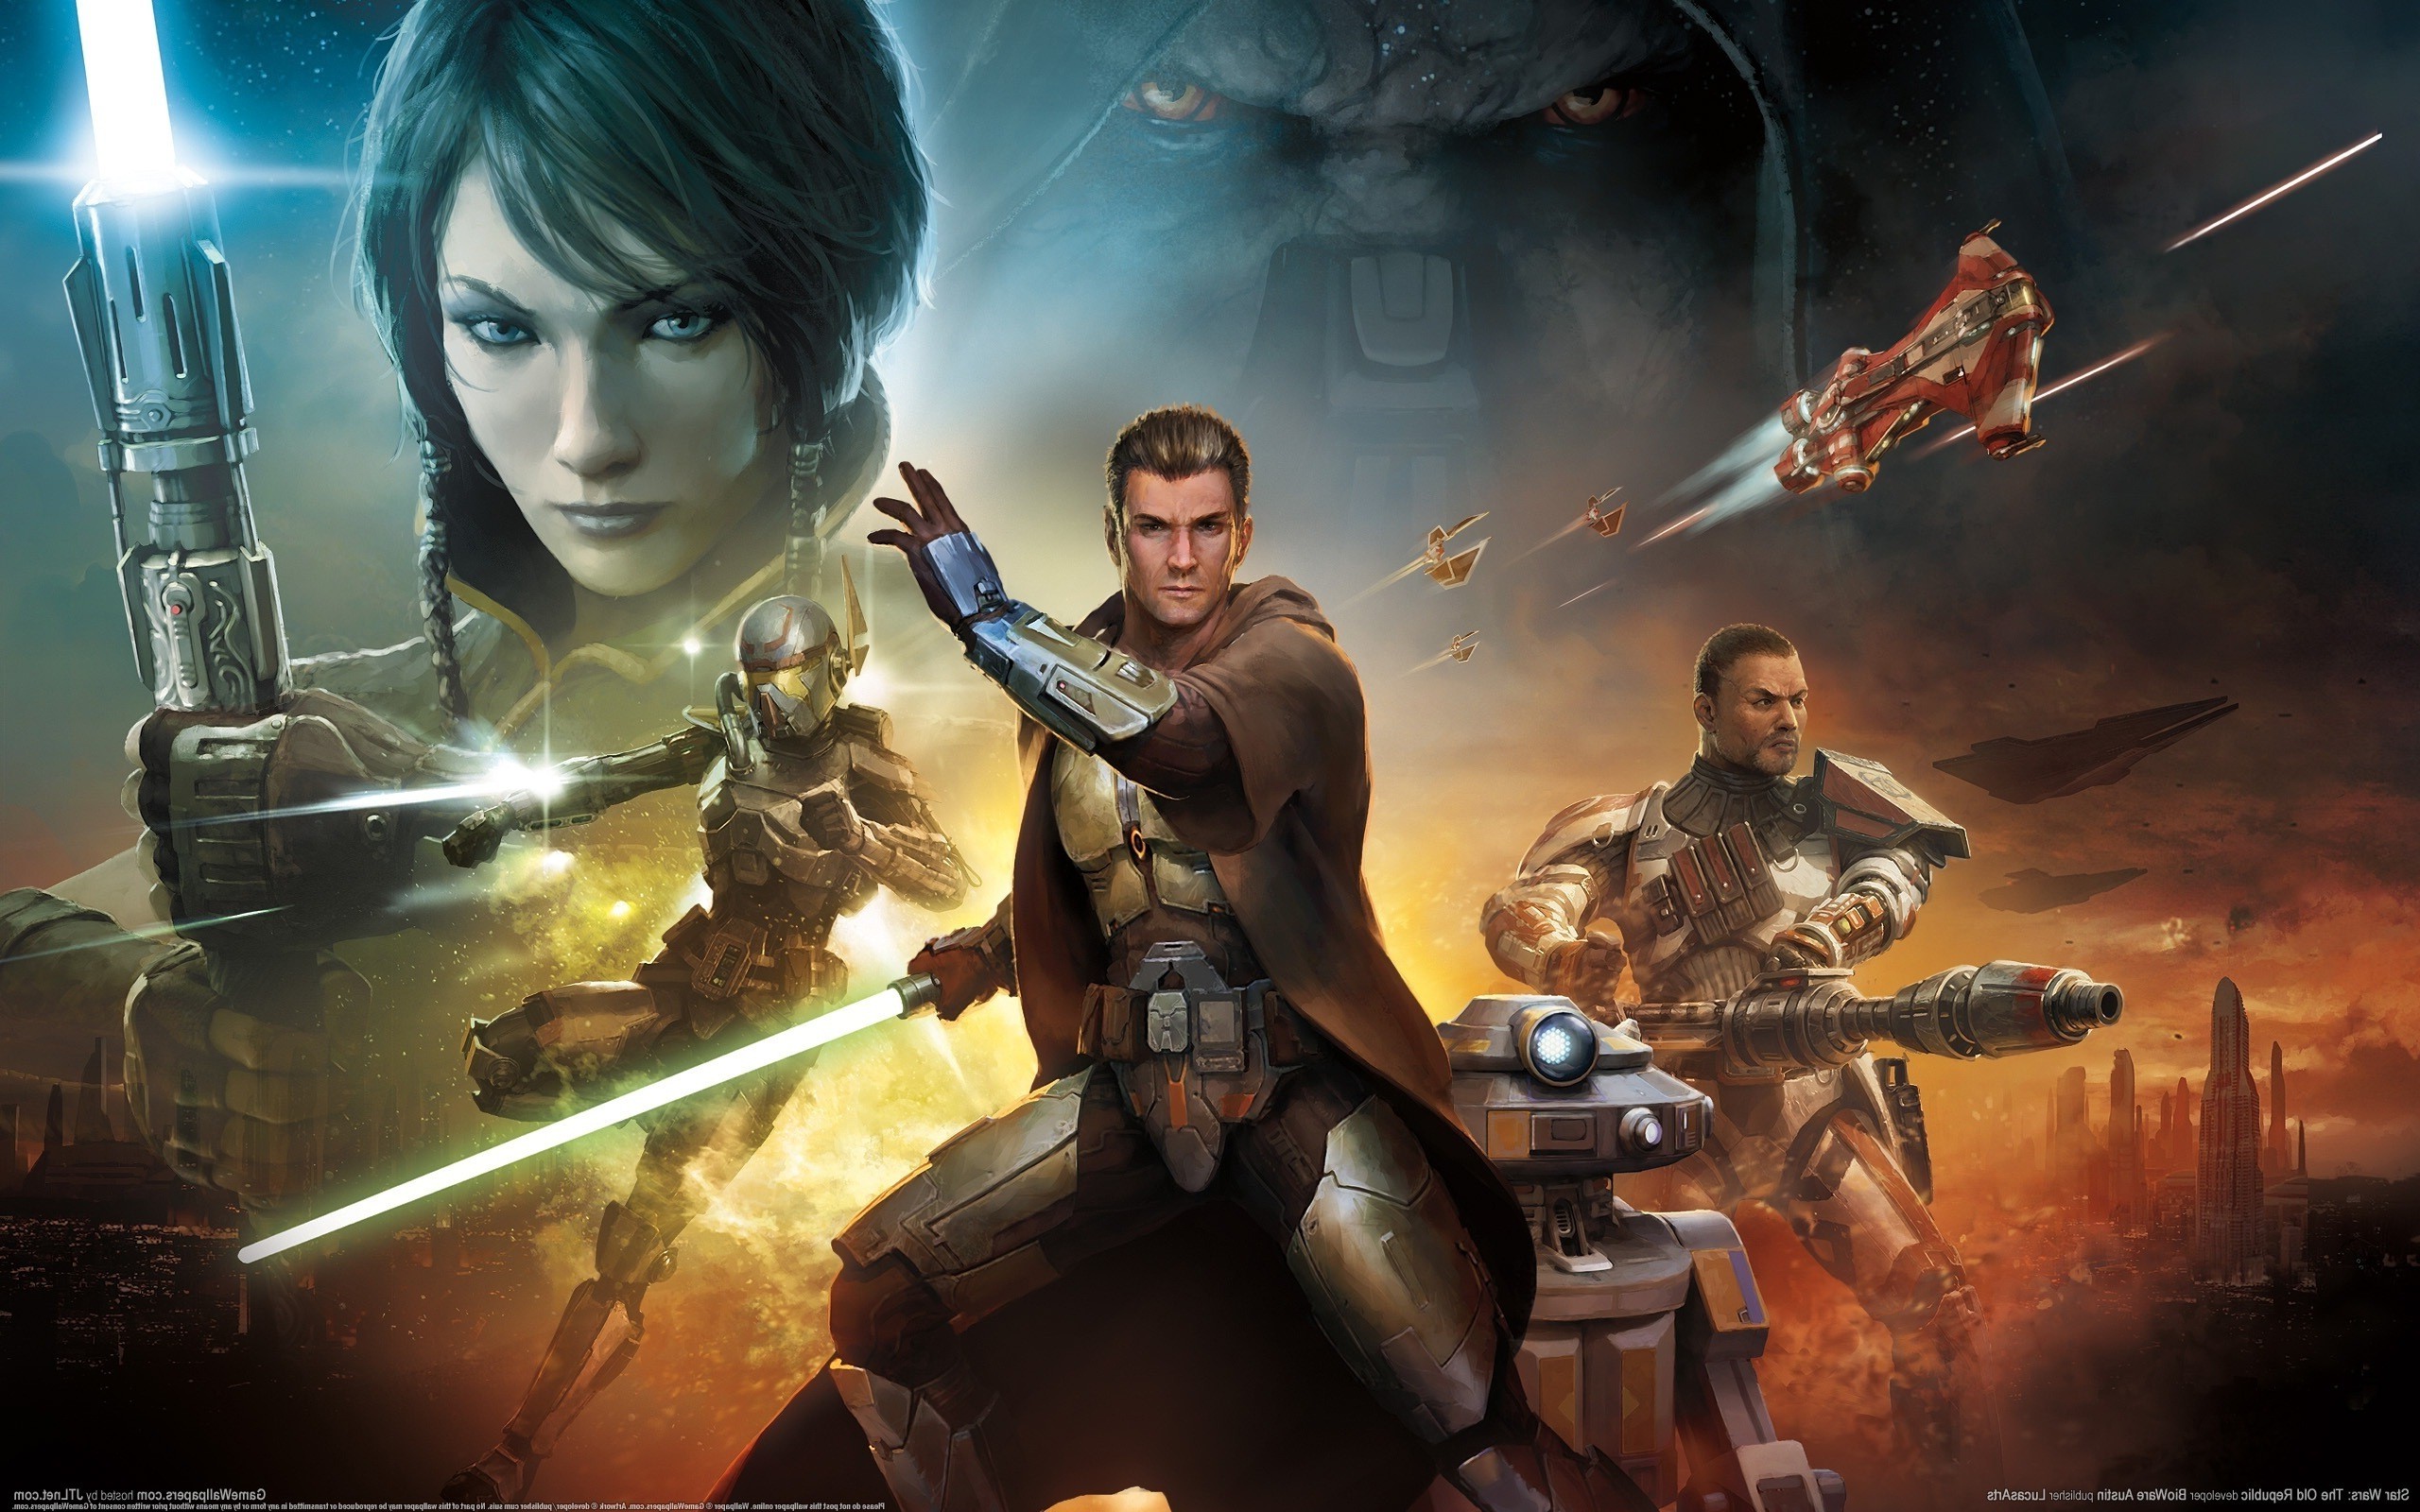 uninstall star wars the old republic